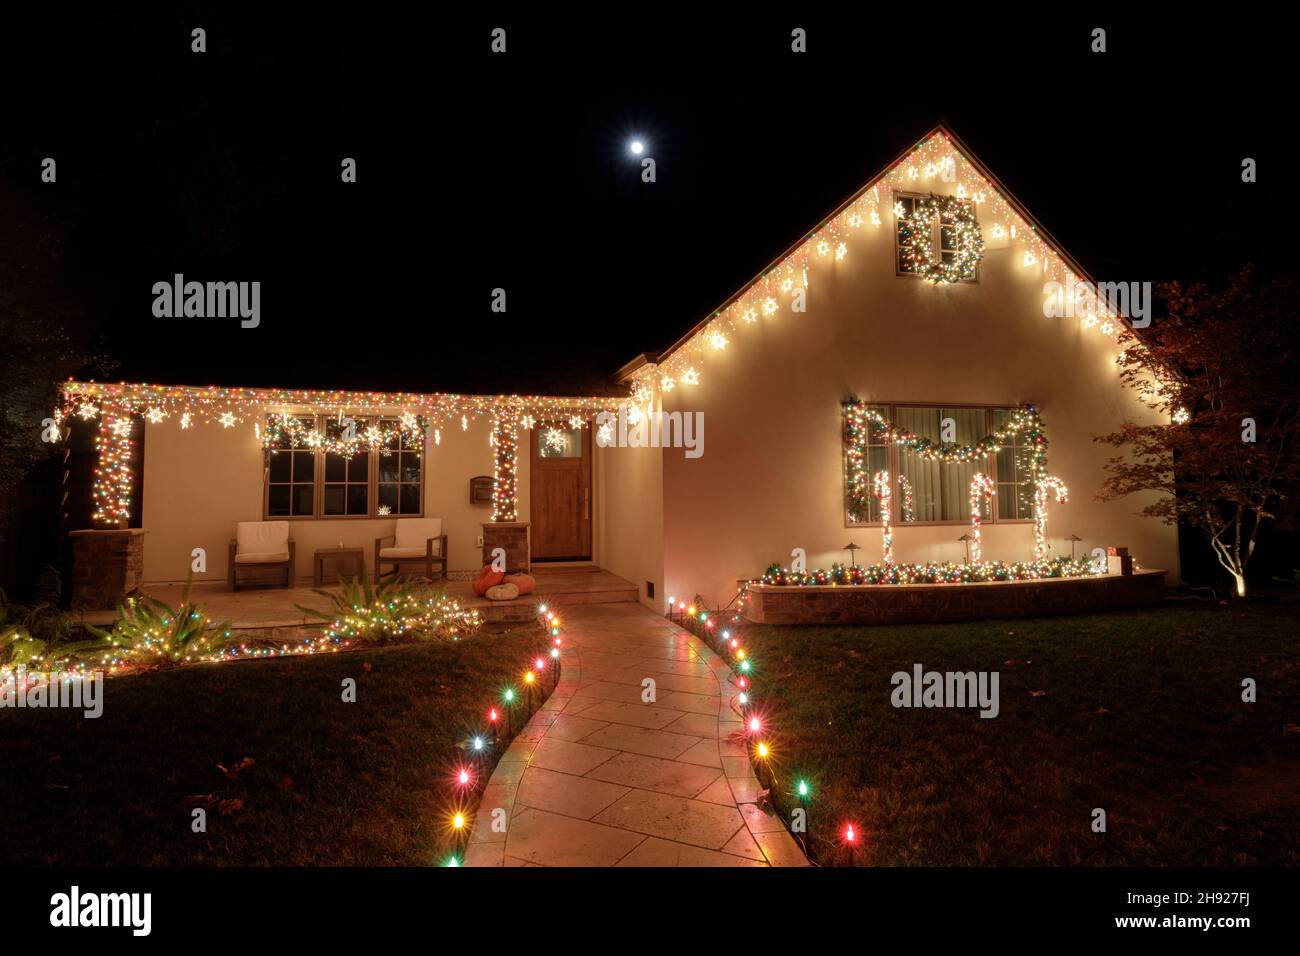 Christmas lights decorating house at night with full moon Stock Photo